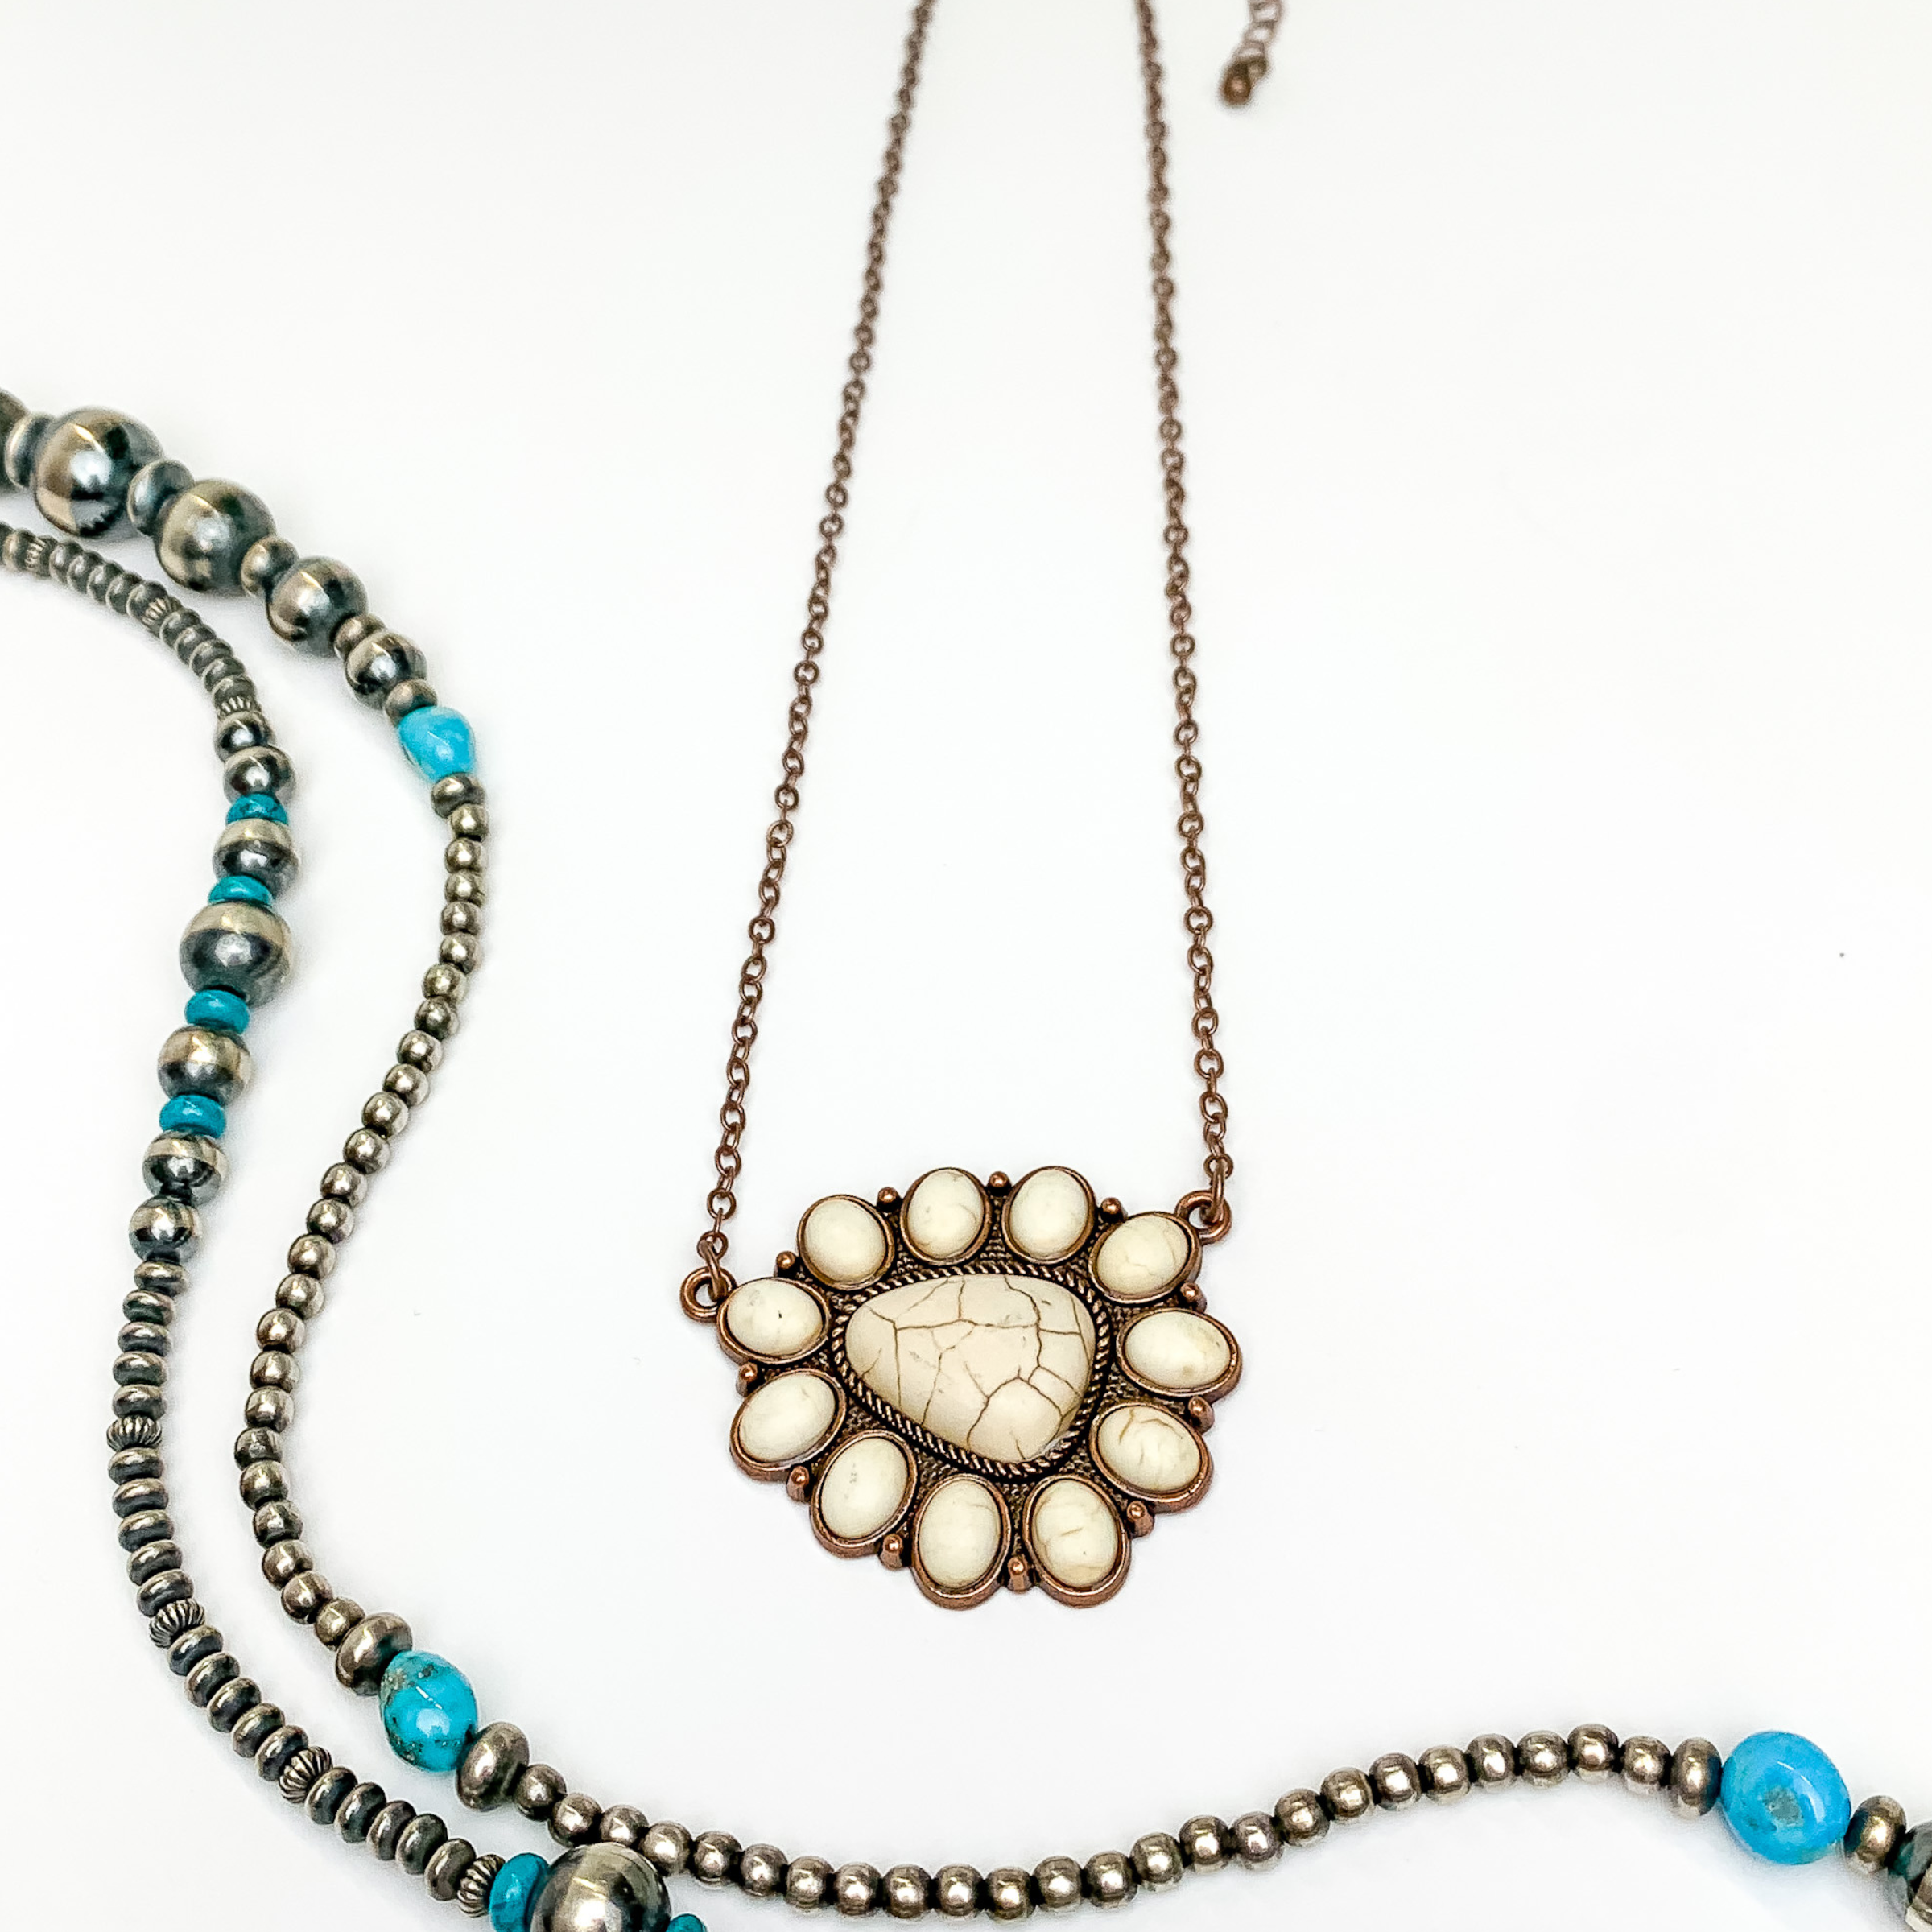 Copper chain necklace with triangular cluster pendant. This pendant is made up of ivory stones. This necklace is pictured on an white background with silver and turquoise beads on the left side of the picture.